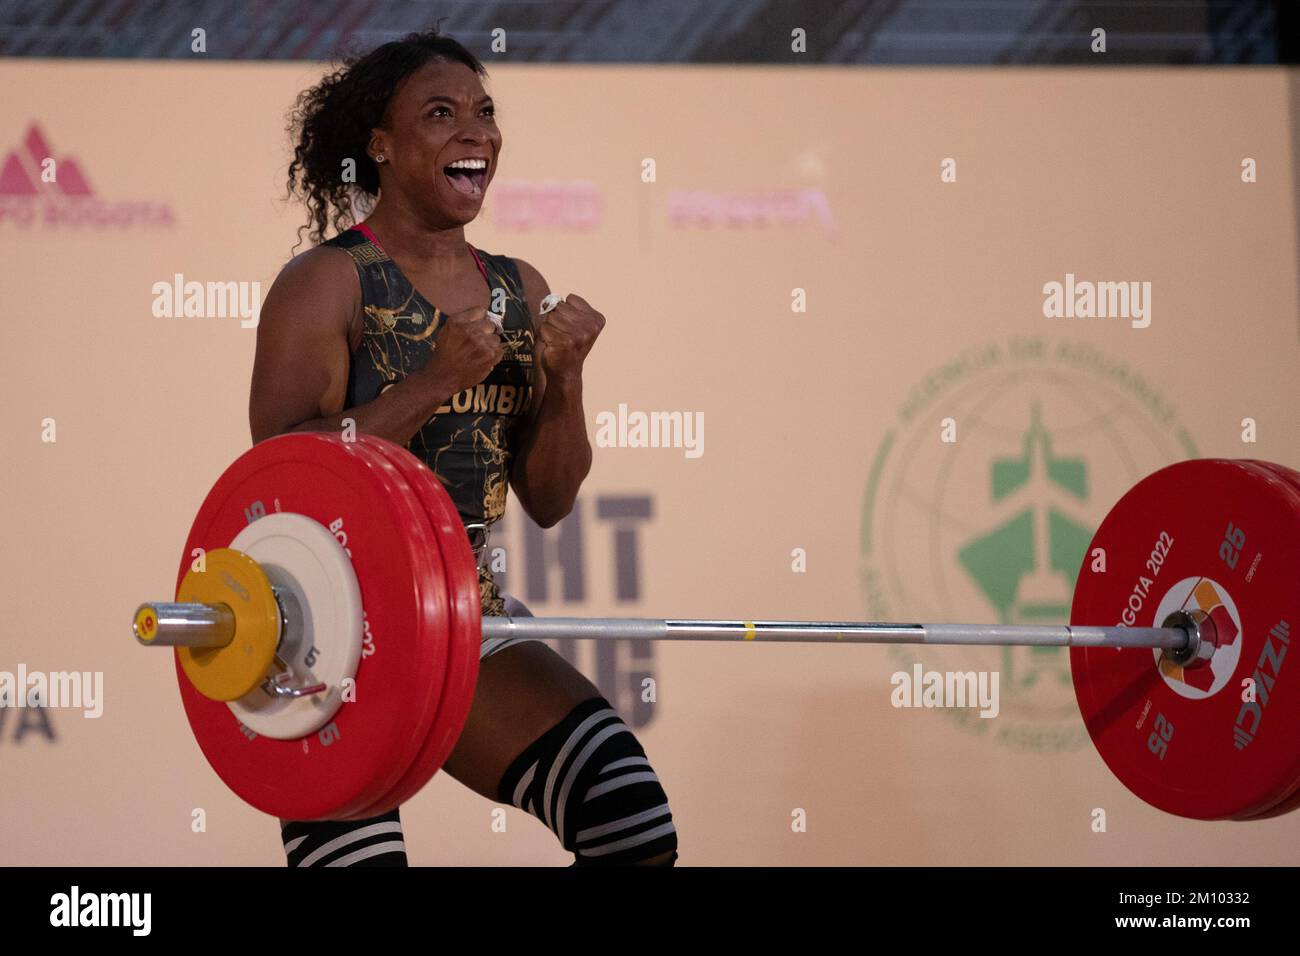 Bogota, Colombia. 8th Dec, 2022. Alvarez Caicedo Yenny Fernanda of Colombia celebrates during the womens 59 kg event at the 2022 World Weightlifting Championships in Bogota, Colombia, on Dec